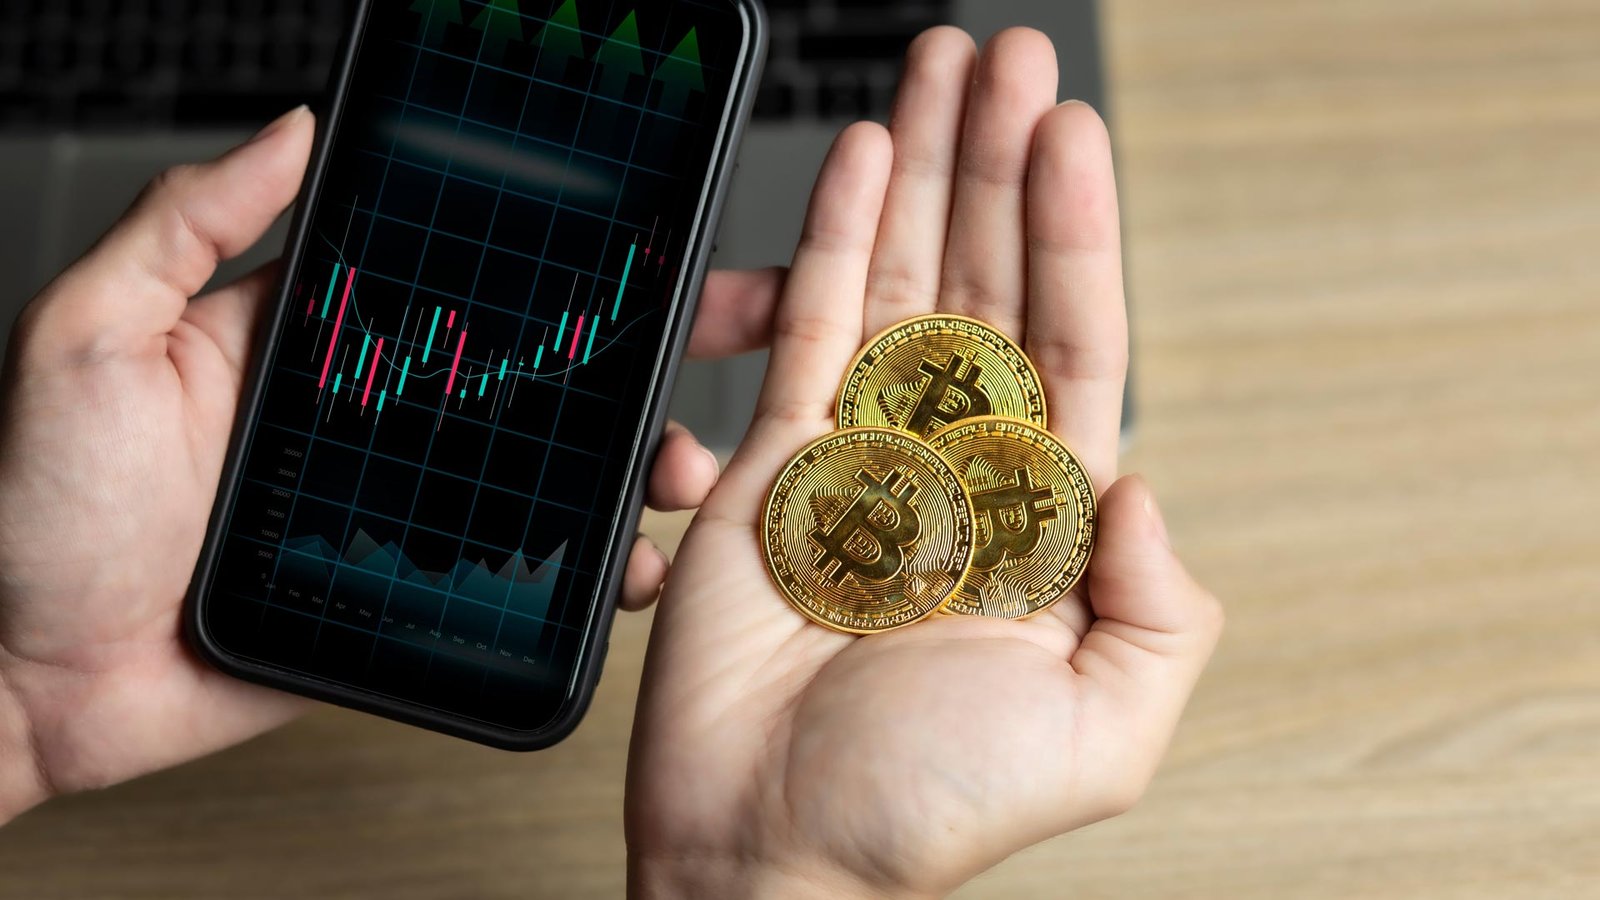 bitcoins in palm while looking at crypto price chart